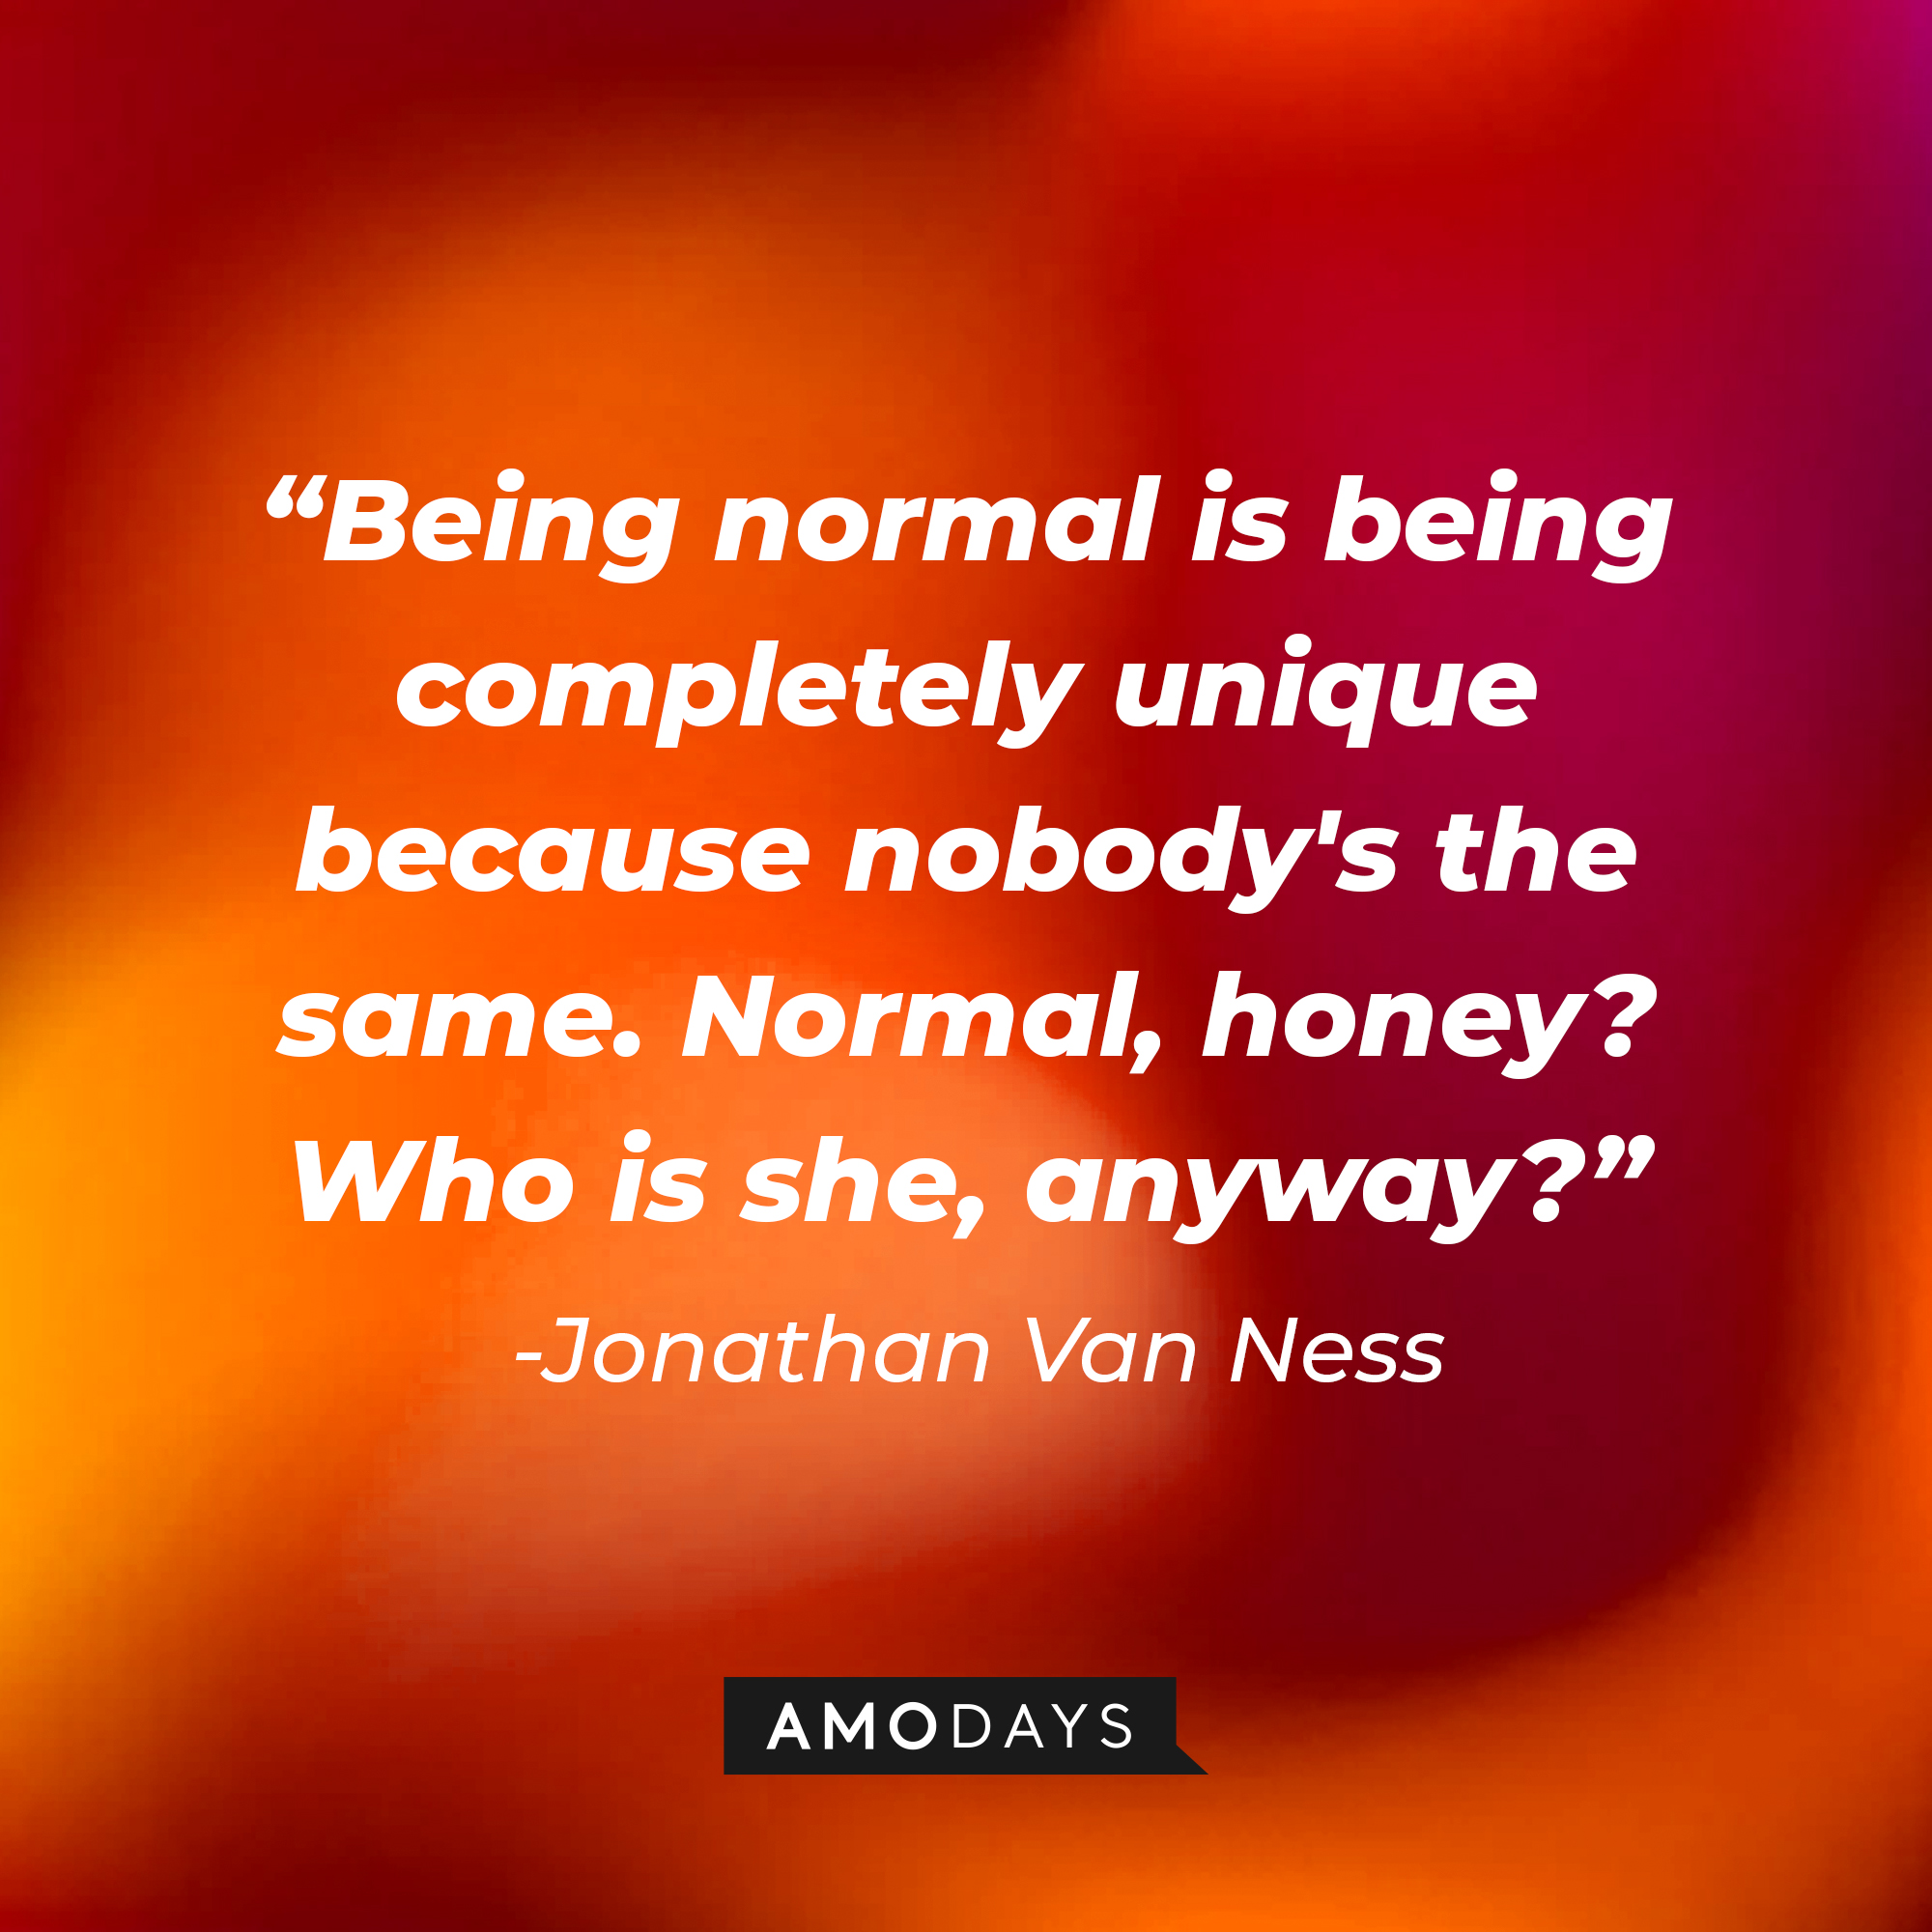 Jonathan Van Ness’ quote: "Being normal is being completely unique because nobody's the same. Normal, honey? Who is she, anyway?"  | Image: AmoDays